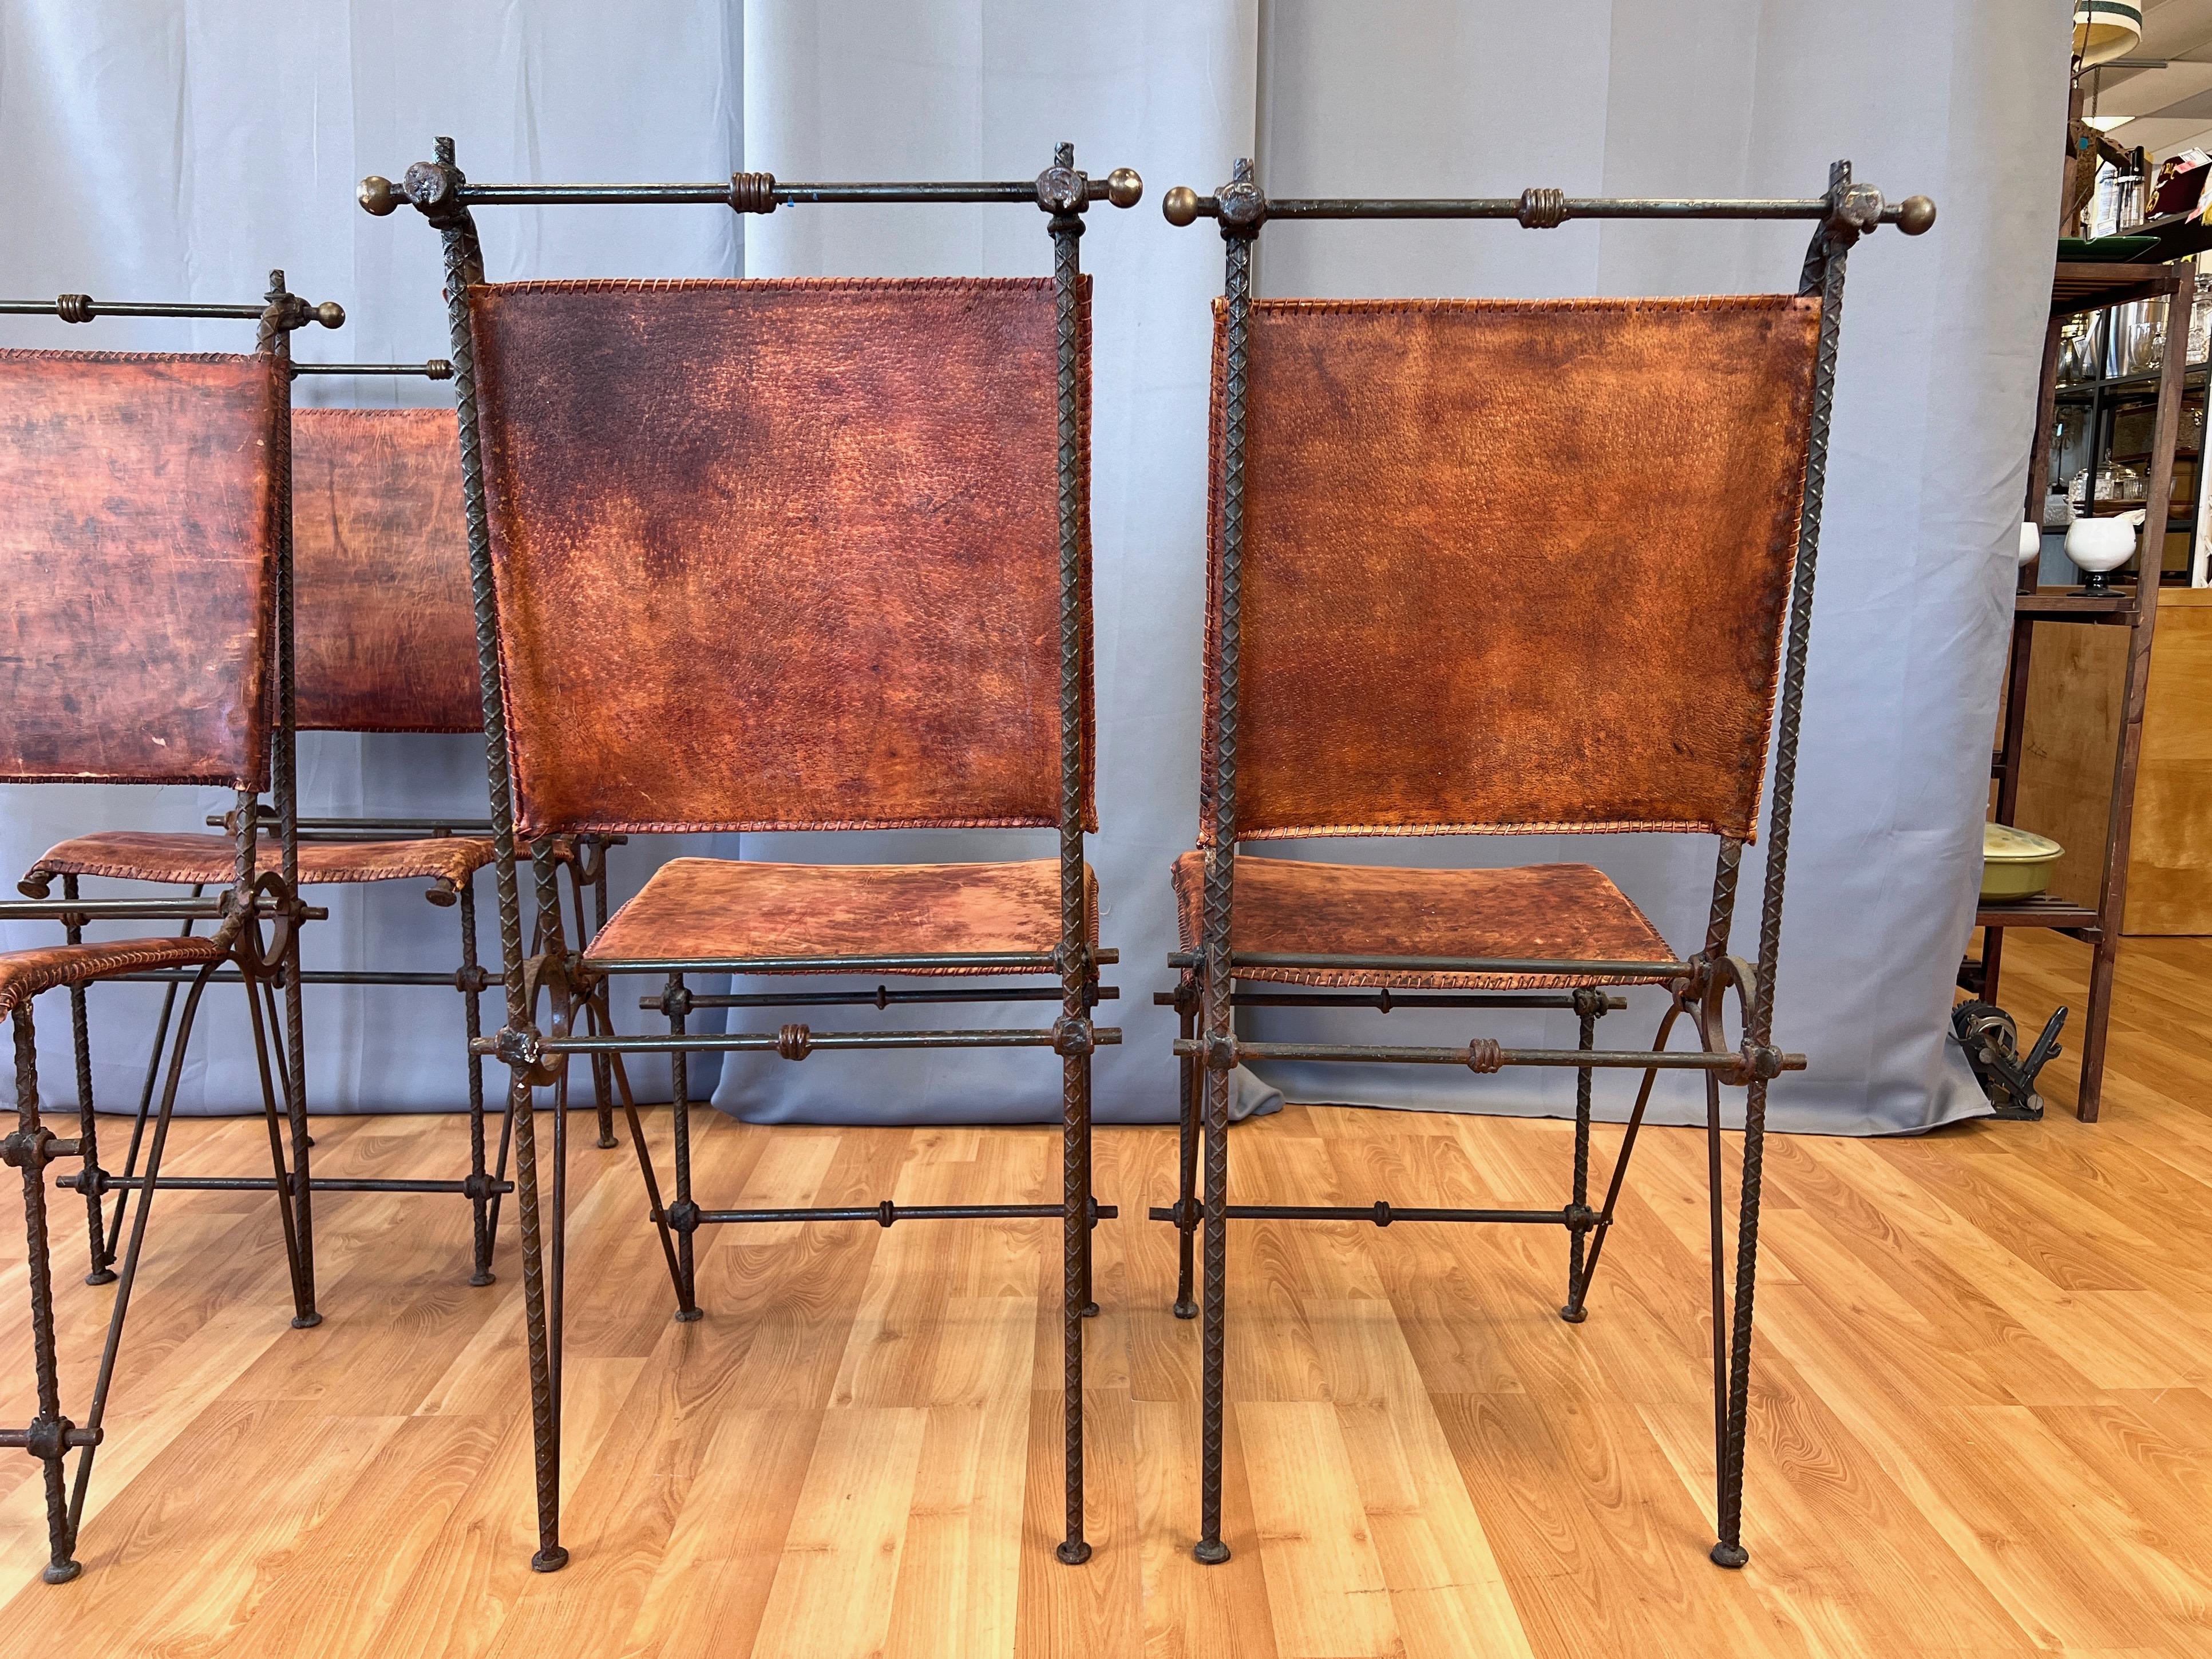 Set of 4 Ilana Goor-Attributed Brutalist Metal and Leather Dining Chairs, 1980 For Sale 5